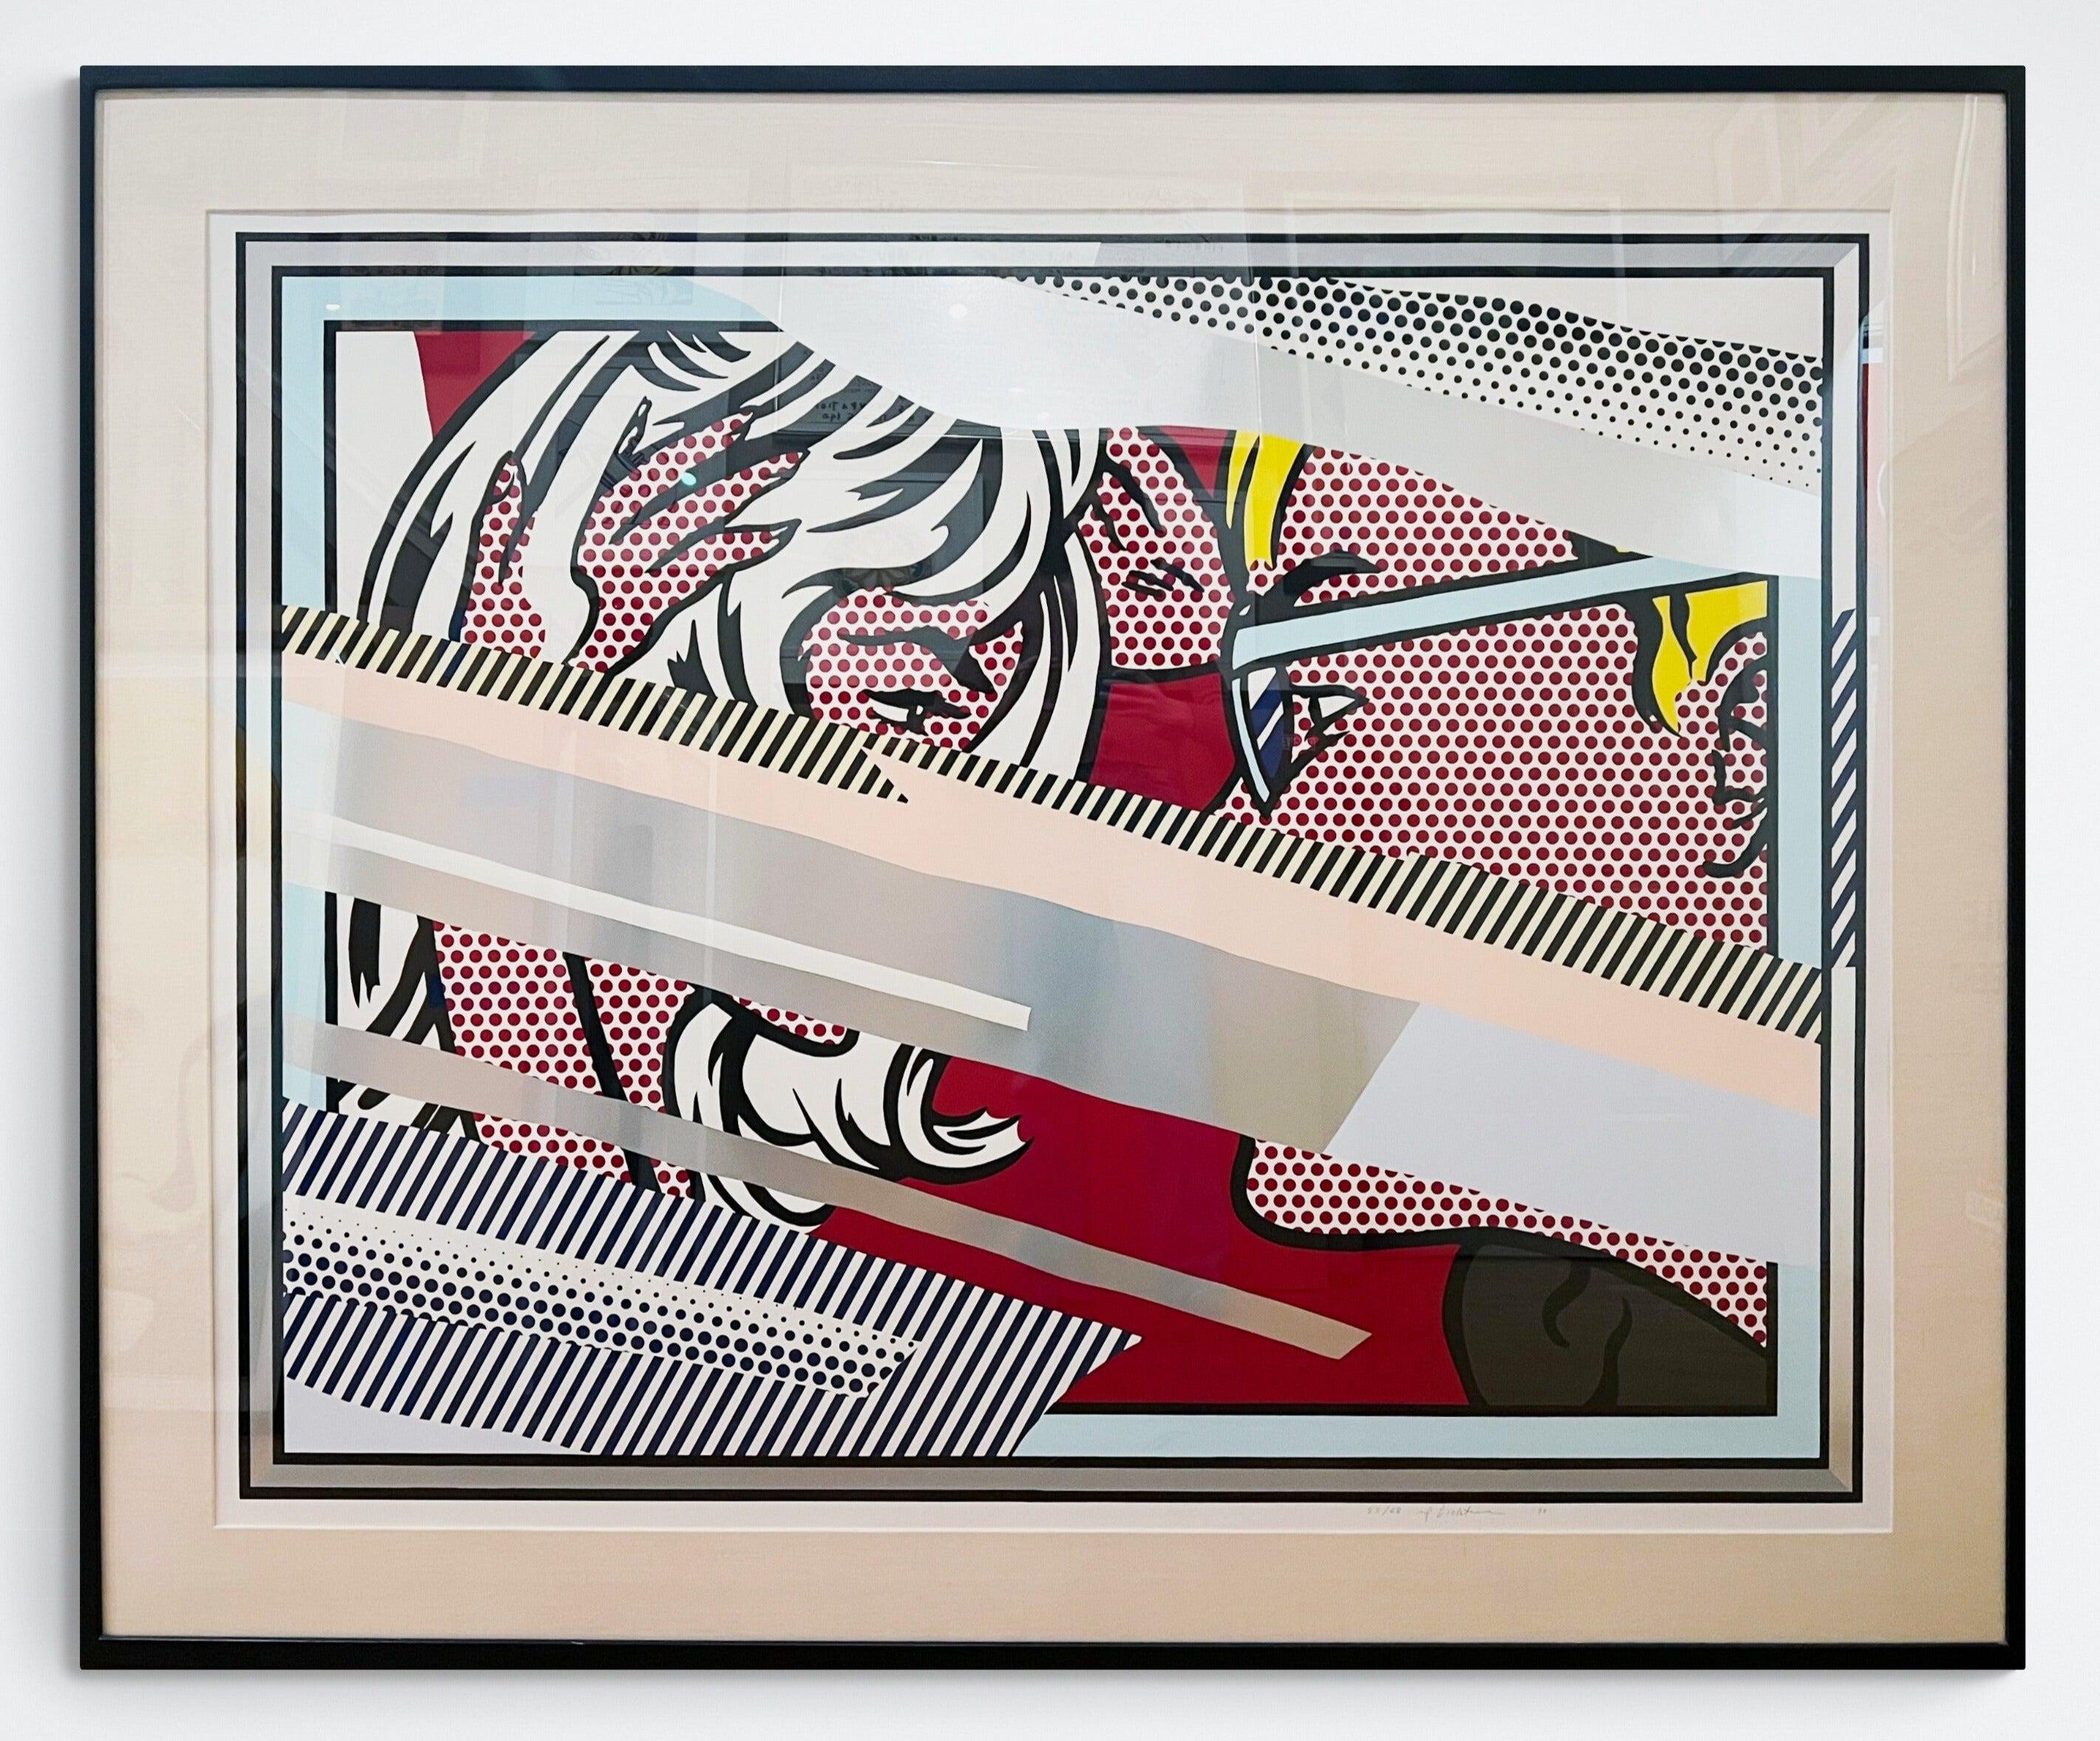 Artist: Roy Lichtenstein
Title: Reflections on Conversation
Medium: Lithograph, screenprint, relief and metalized PVC collage with embossing on mold-made Somerset paper
Year: 1990
Edition: 53/68
Sheet Size: 53 3/4